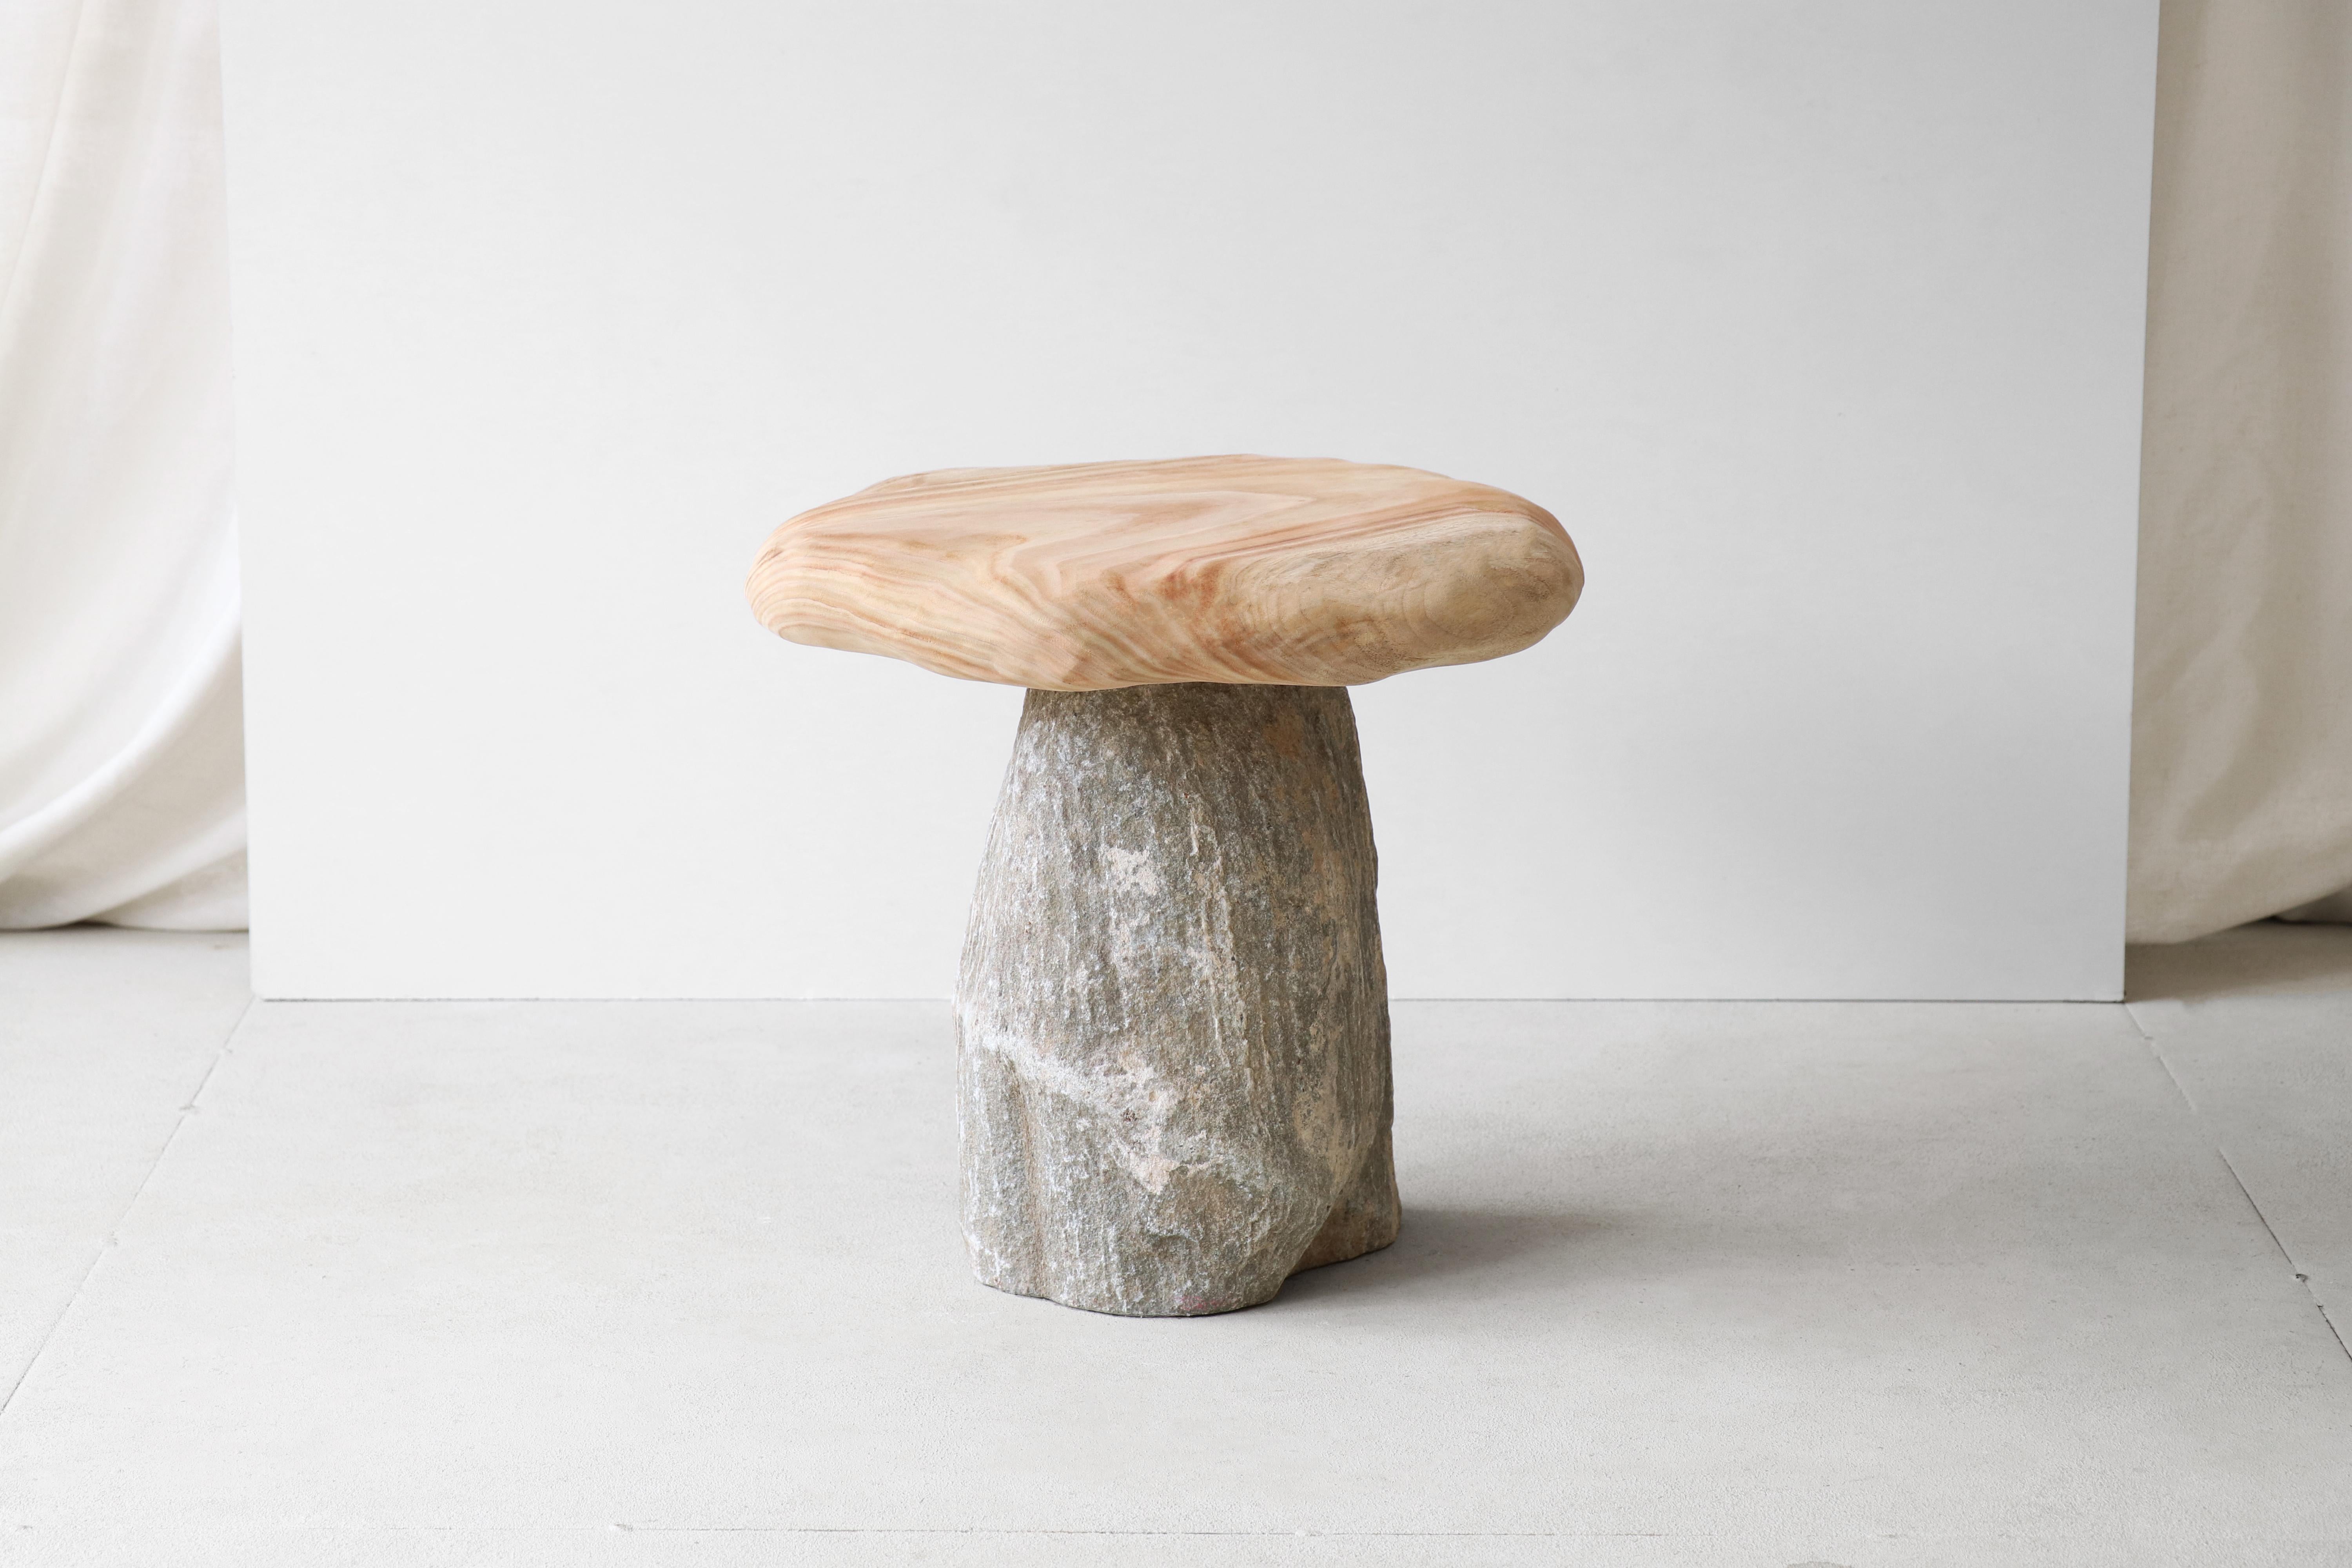 Bolete Side Table by Henry D'ath
In collaboration with Batten and Kamp
Dimensions: D 40 x W 45 x H 45 cm
Materials: Wood, granite.
Available in natural or black ink finishes.

The Bolete side table. A serendipitous pairing of elements defined